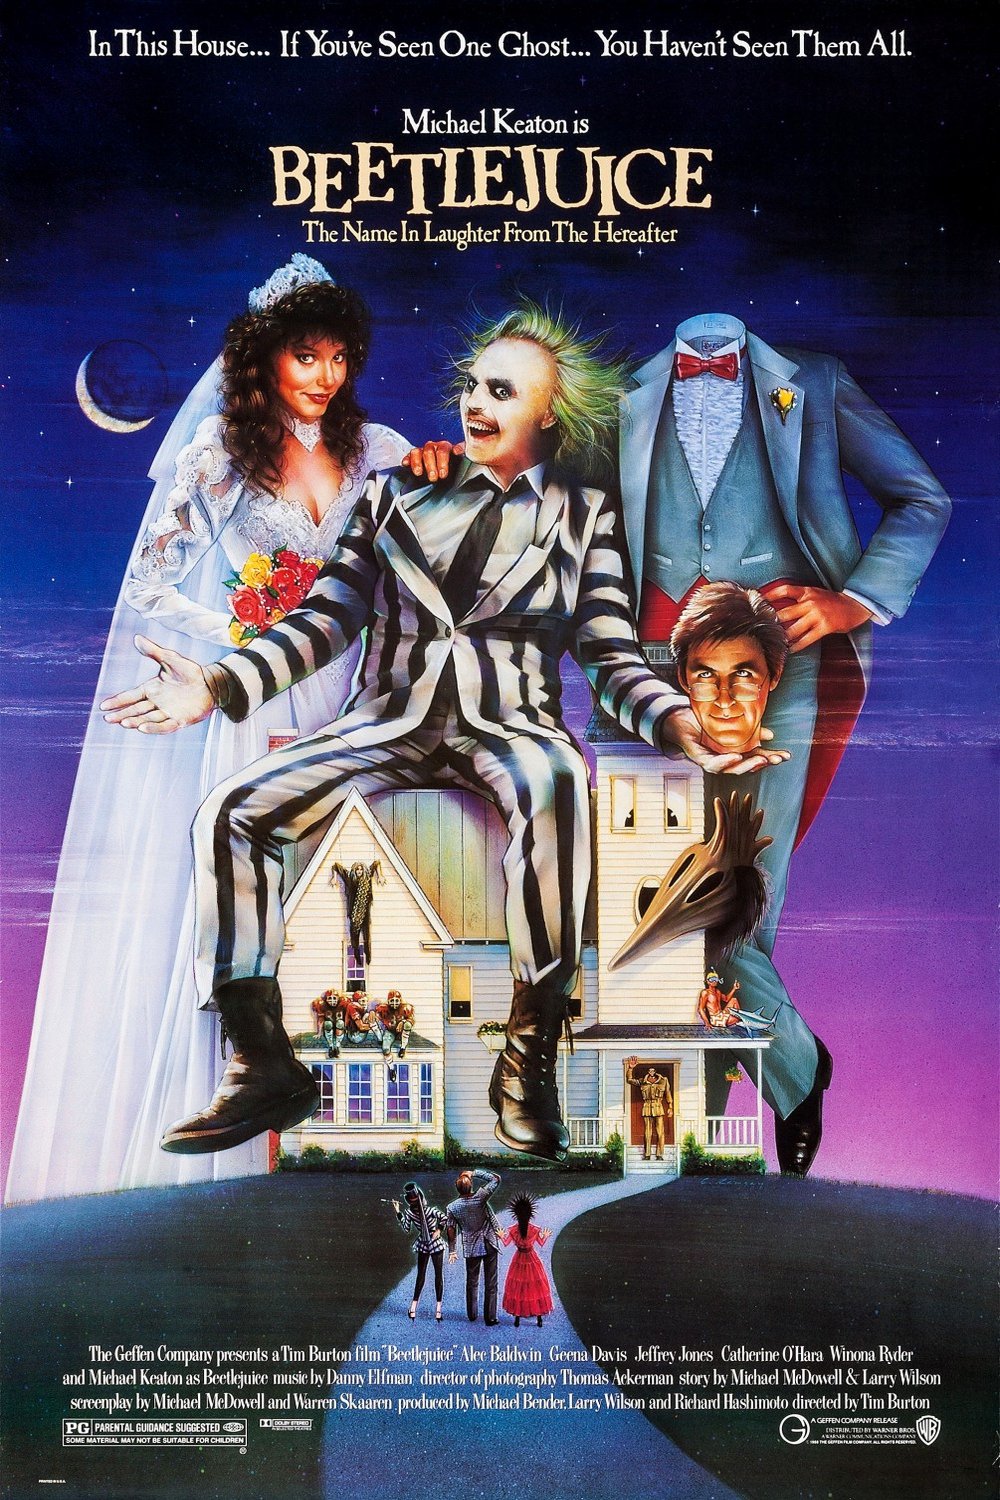 Poster of the movie Beetlejuice